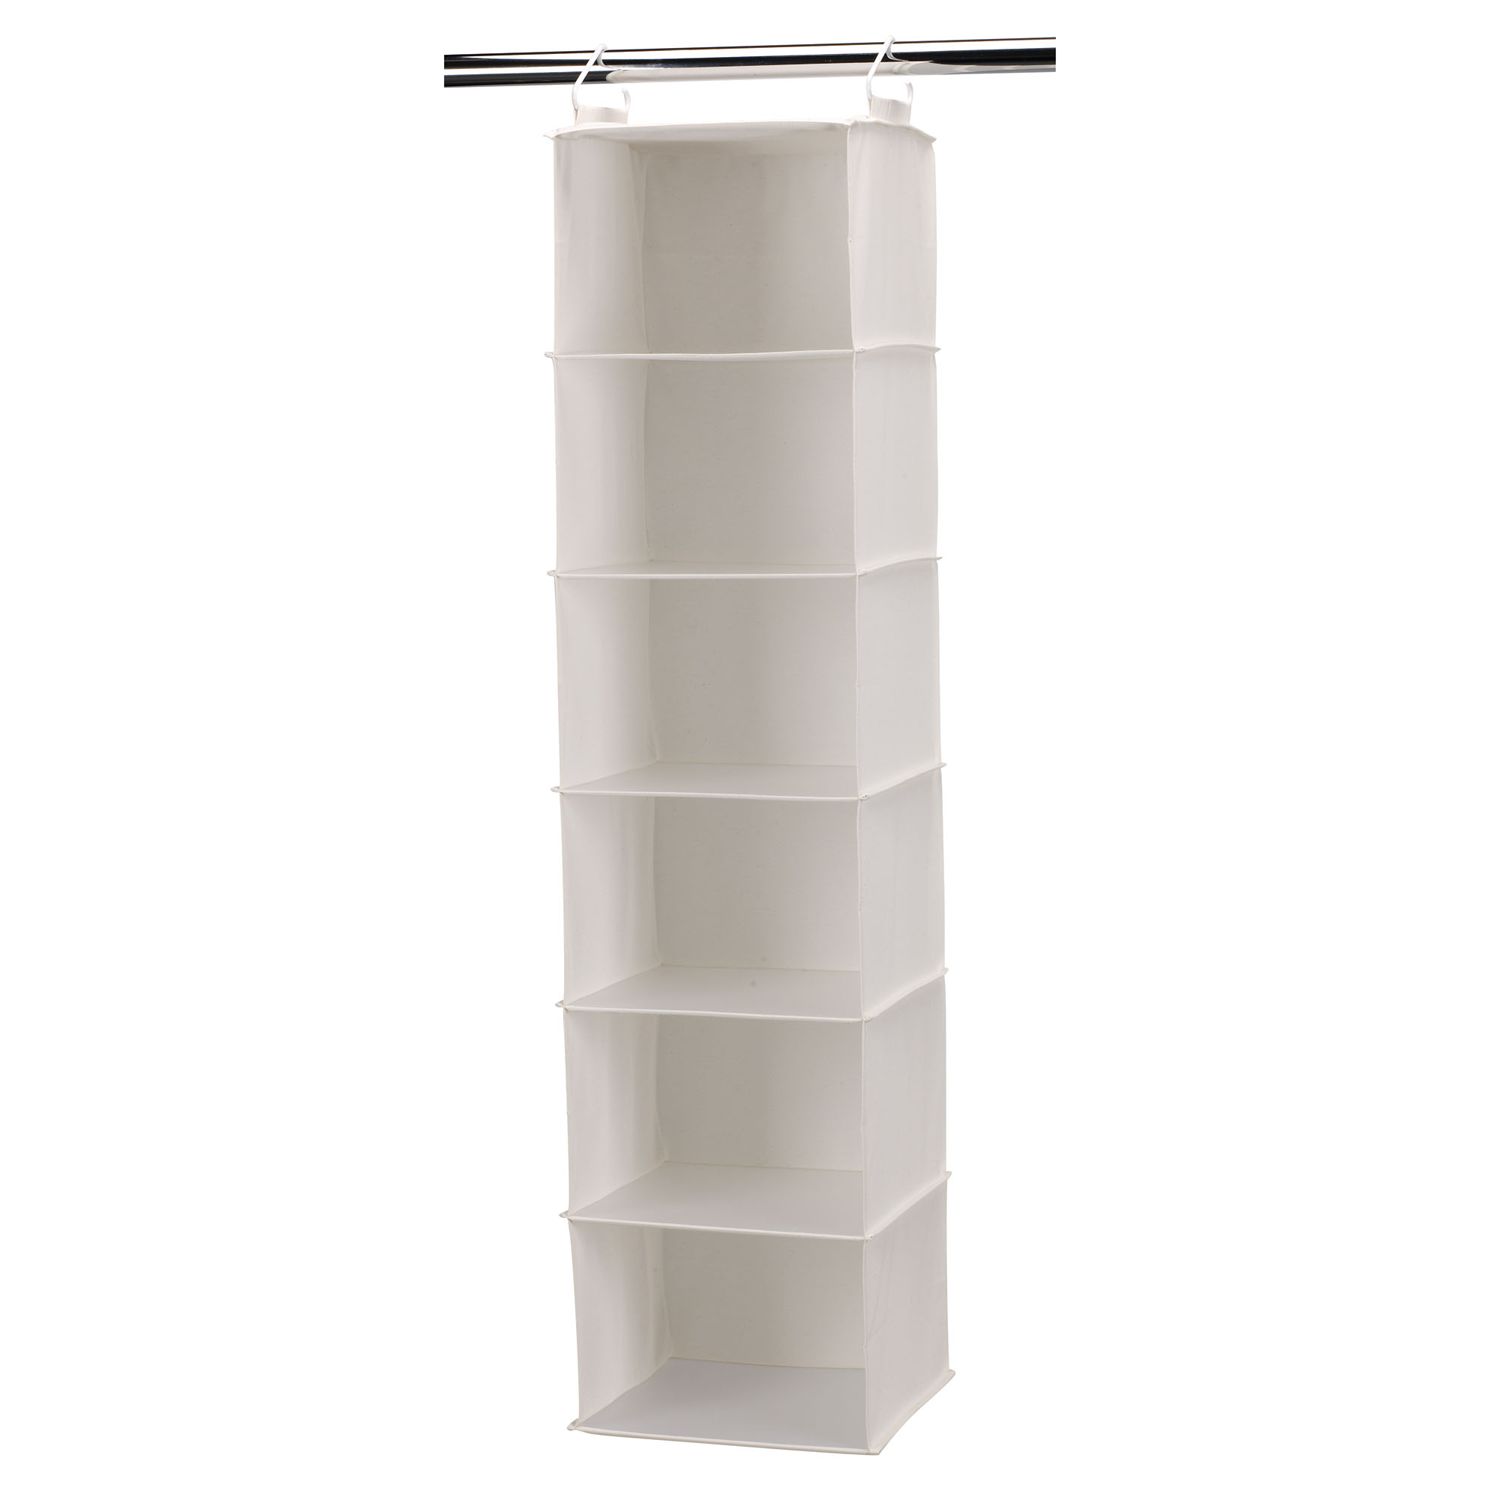 Image for Household Essentials 6-Compartment Hanging Organizer Bag at Kohl's.